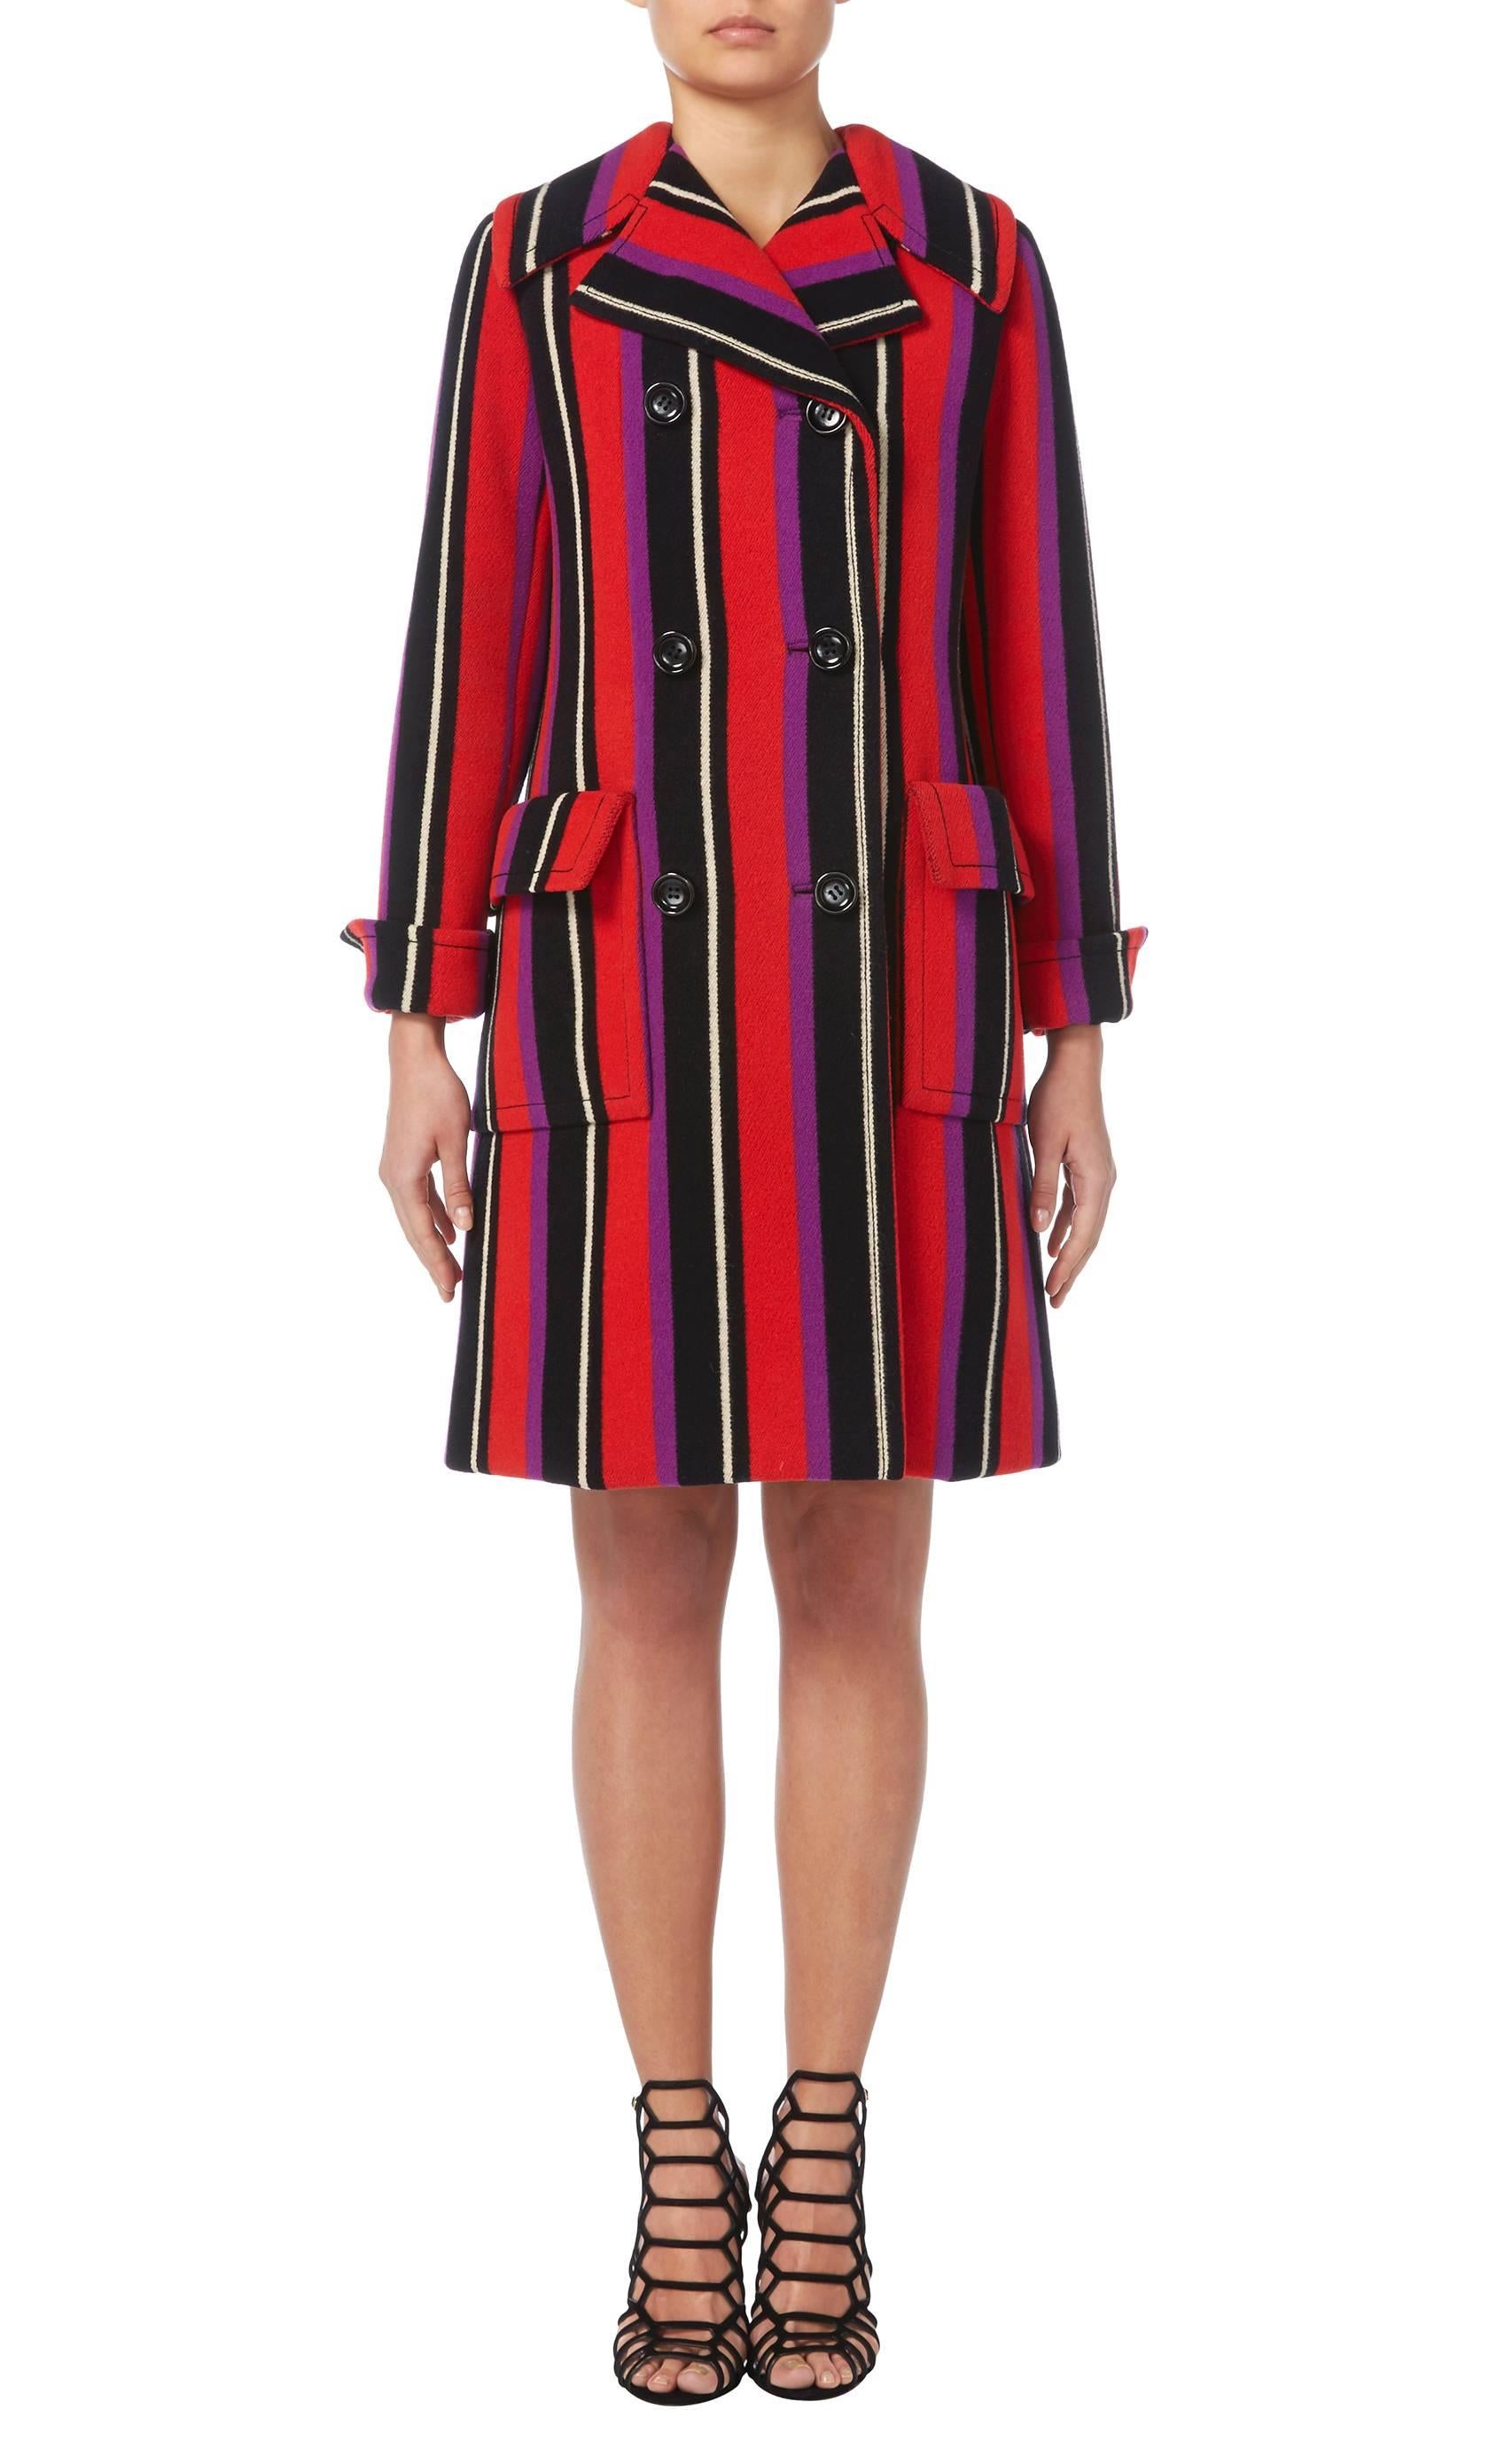 This haute couture Op art striped coat by Marc Bohan for Dior will add a touch fun to a winter wardrobe! Constructed in black, ivory, red and purple wool, the double-breasted coat features overscale pockets on the hips and a half belt to the rear.